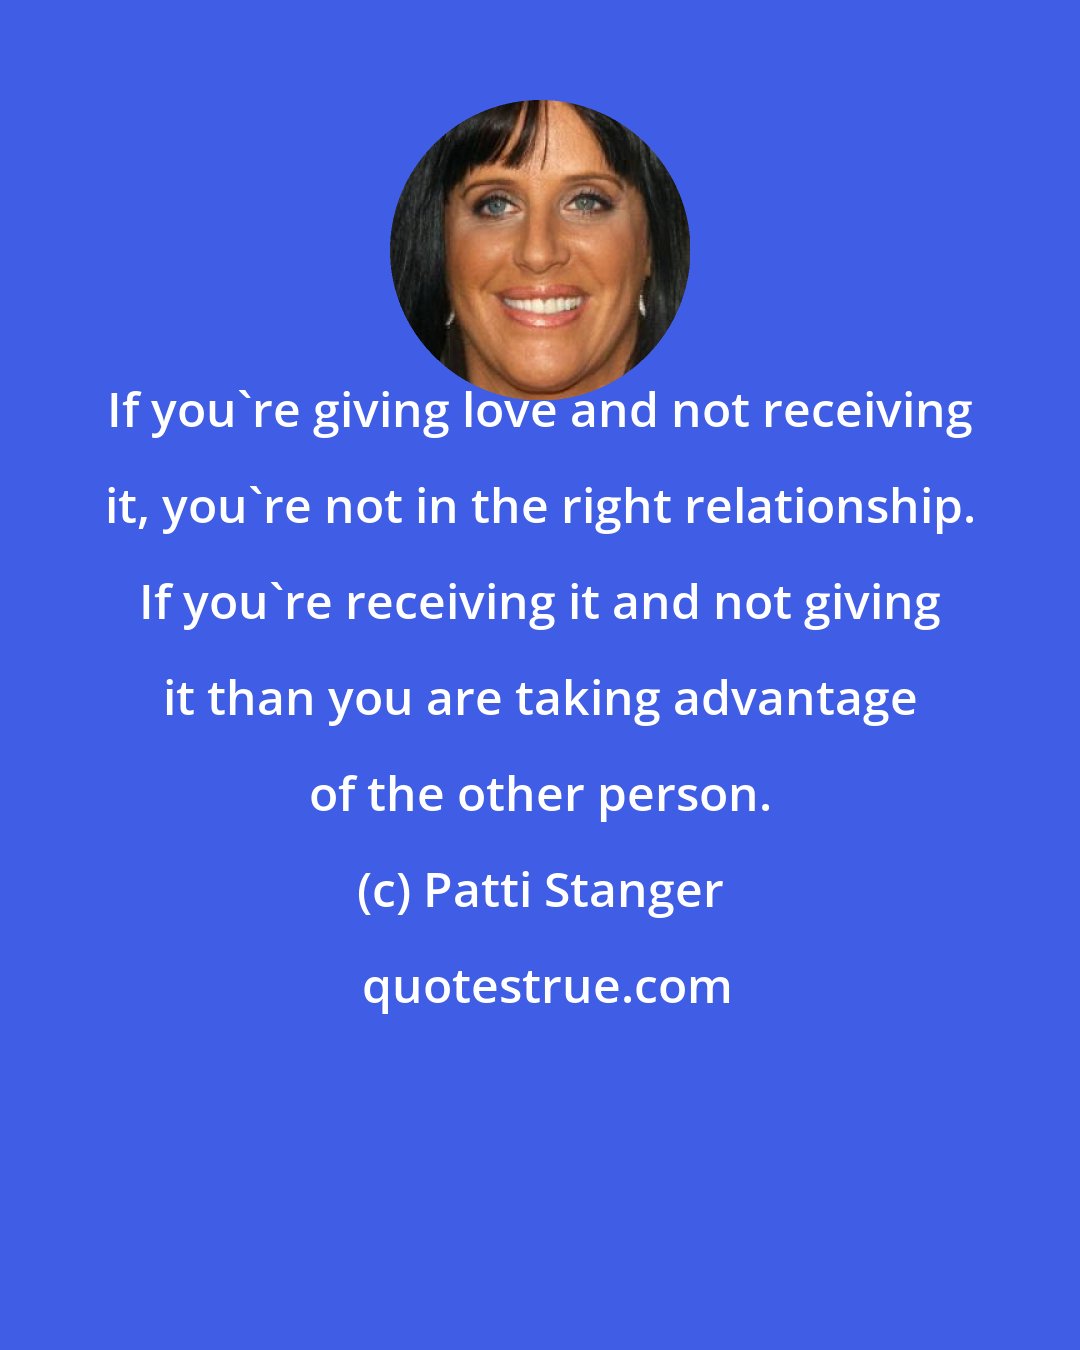 Patti Stanger: If you're giving love and not receiving it, you're not in the right relationship. If you're receiving it and not giving it than you are taking advantage of the other person.